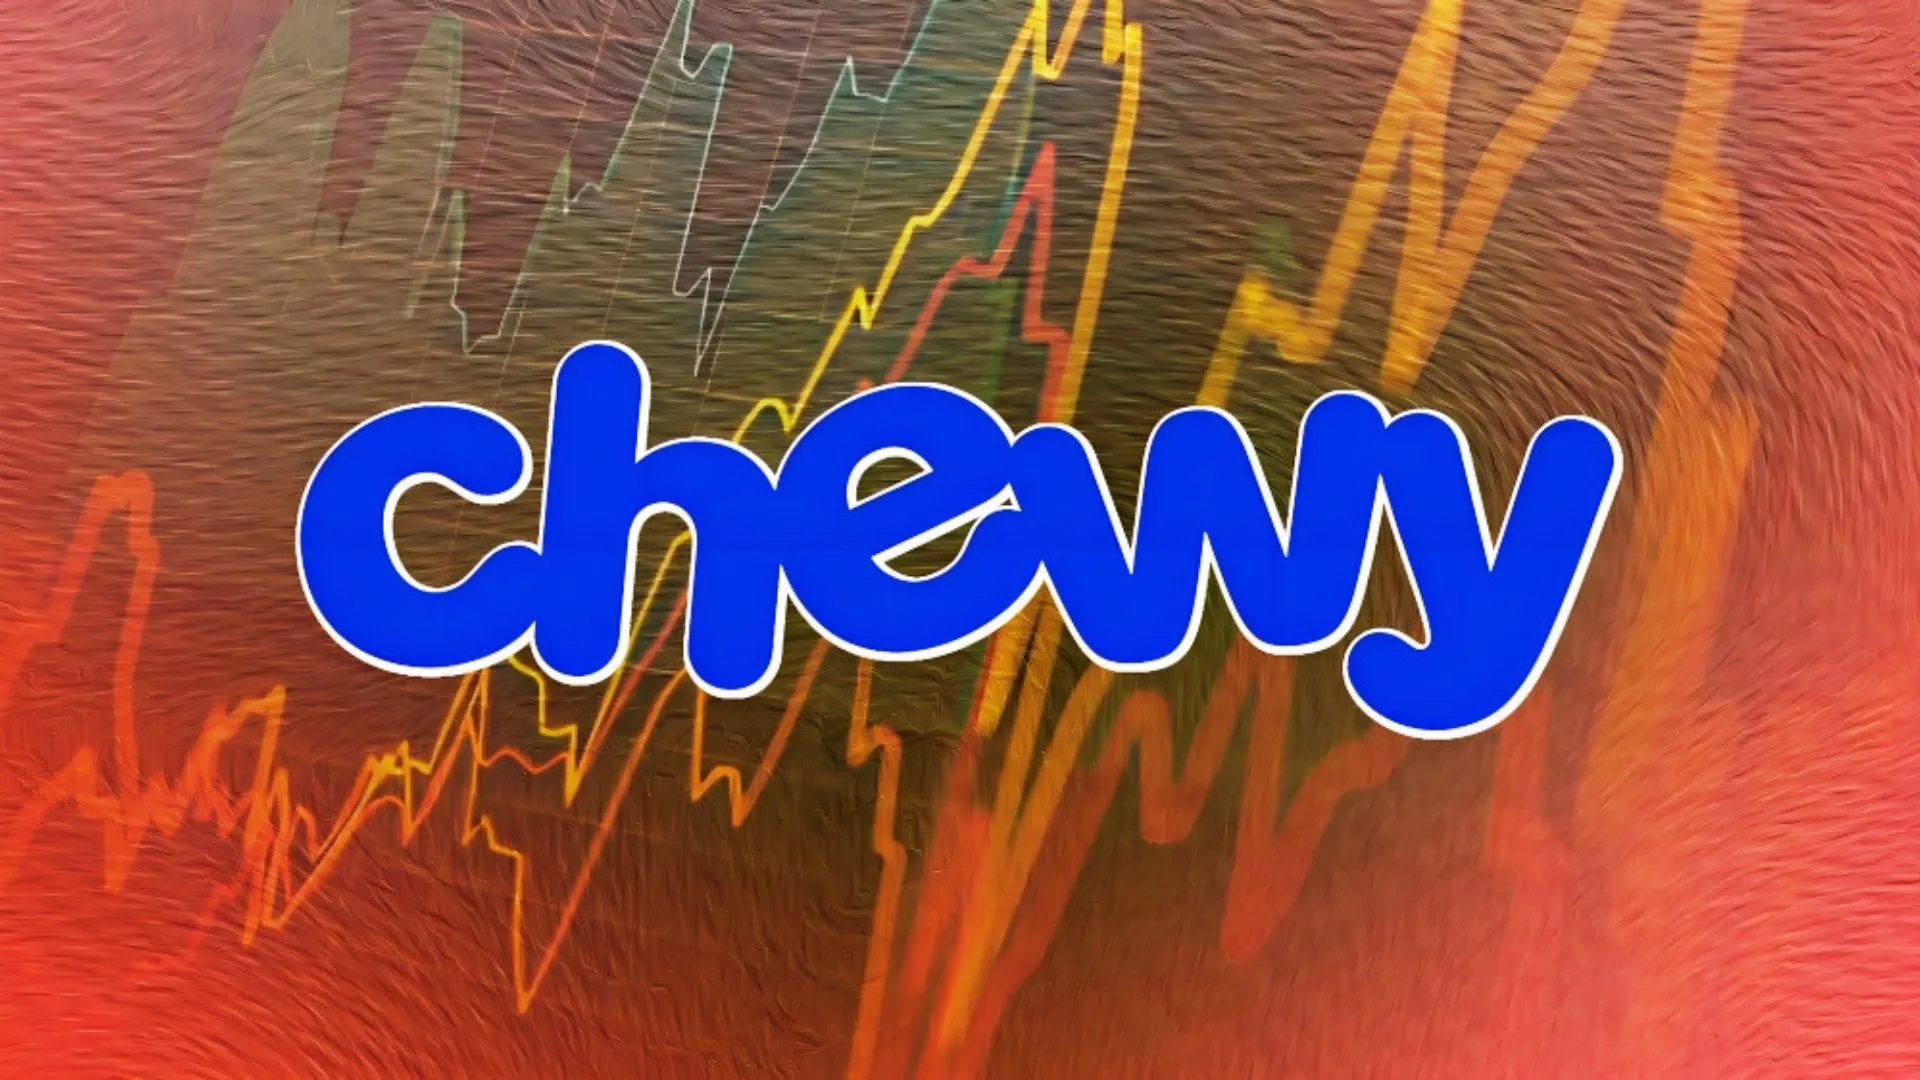 Chewy Inc. (NYSE: CHWY): CHWY Stock Price is At An All-time Low